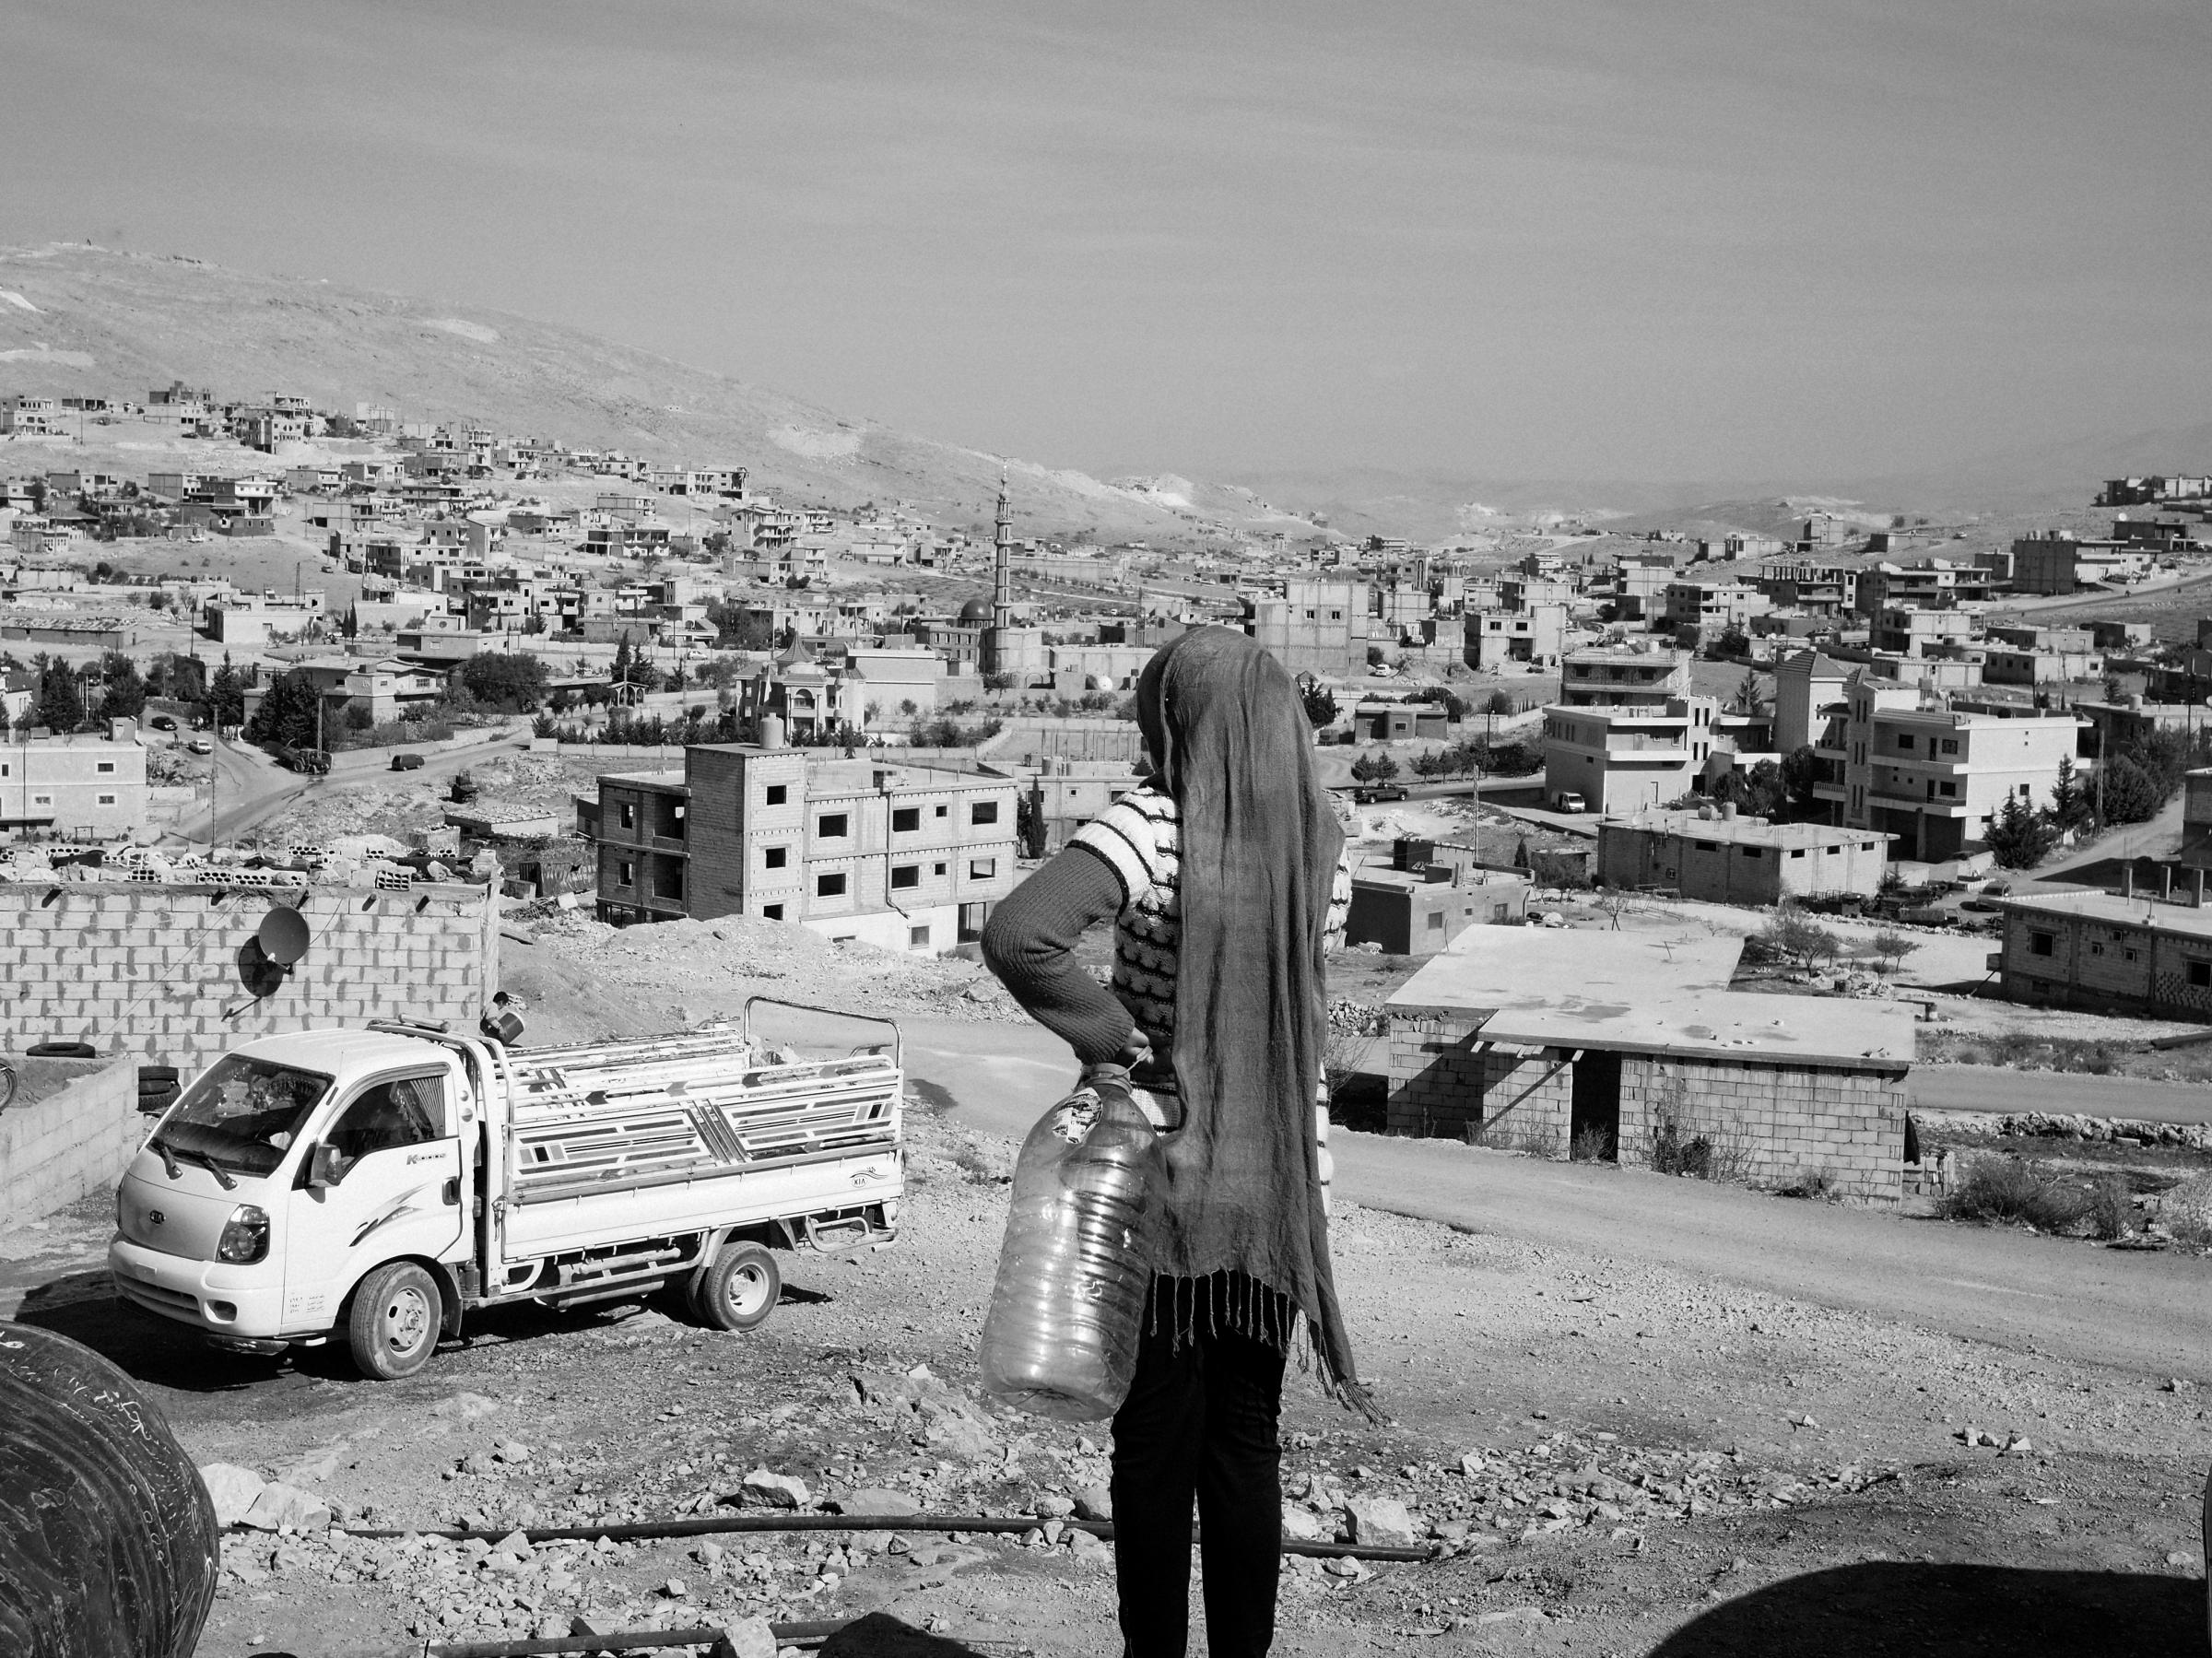 Arsal, Lebanon. November 6, 2013.A Syrian refugee on her way to fetch drinking water in the village of Arsal, Lebanon.(Photo by Moises Saman/MAGNUM)